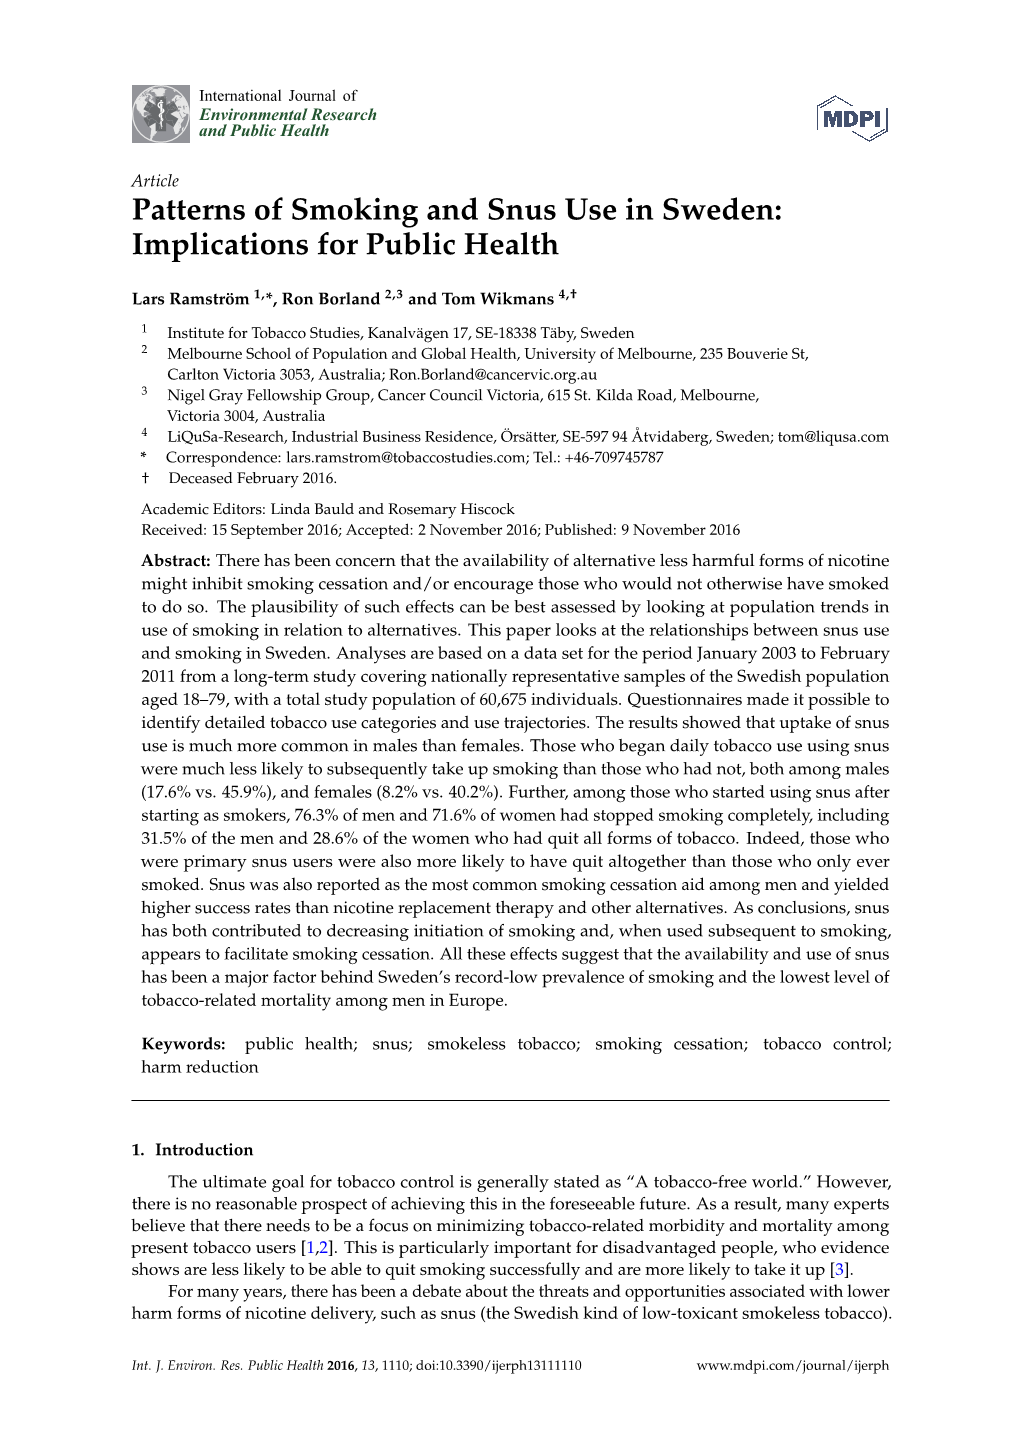 Patterns of Smoking and Snus Use in Sweden: Implications for Public Health